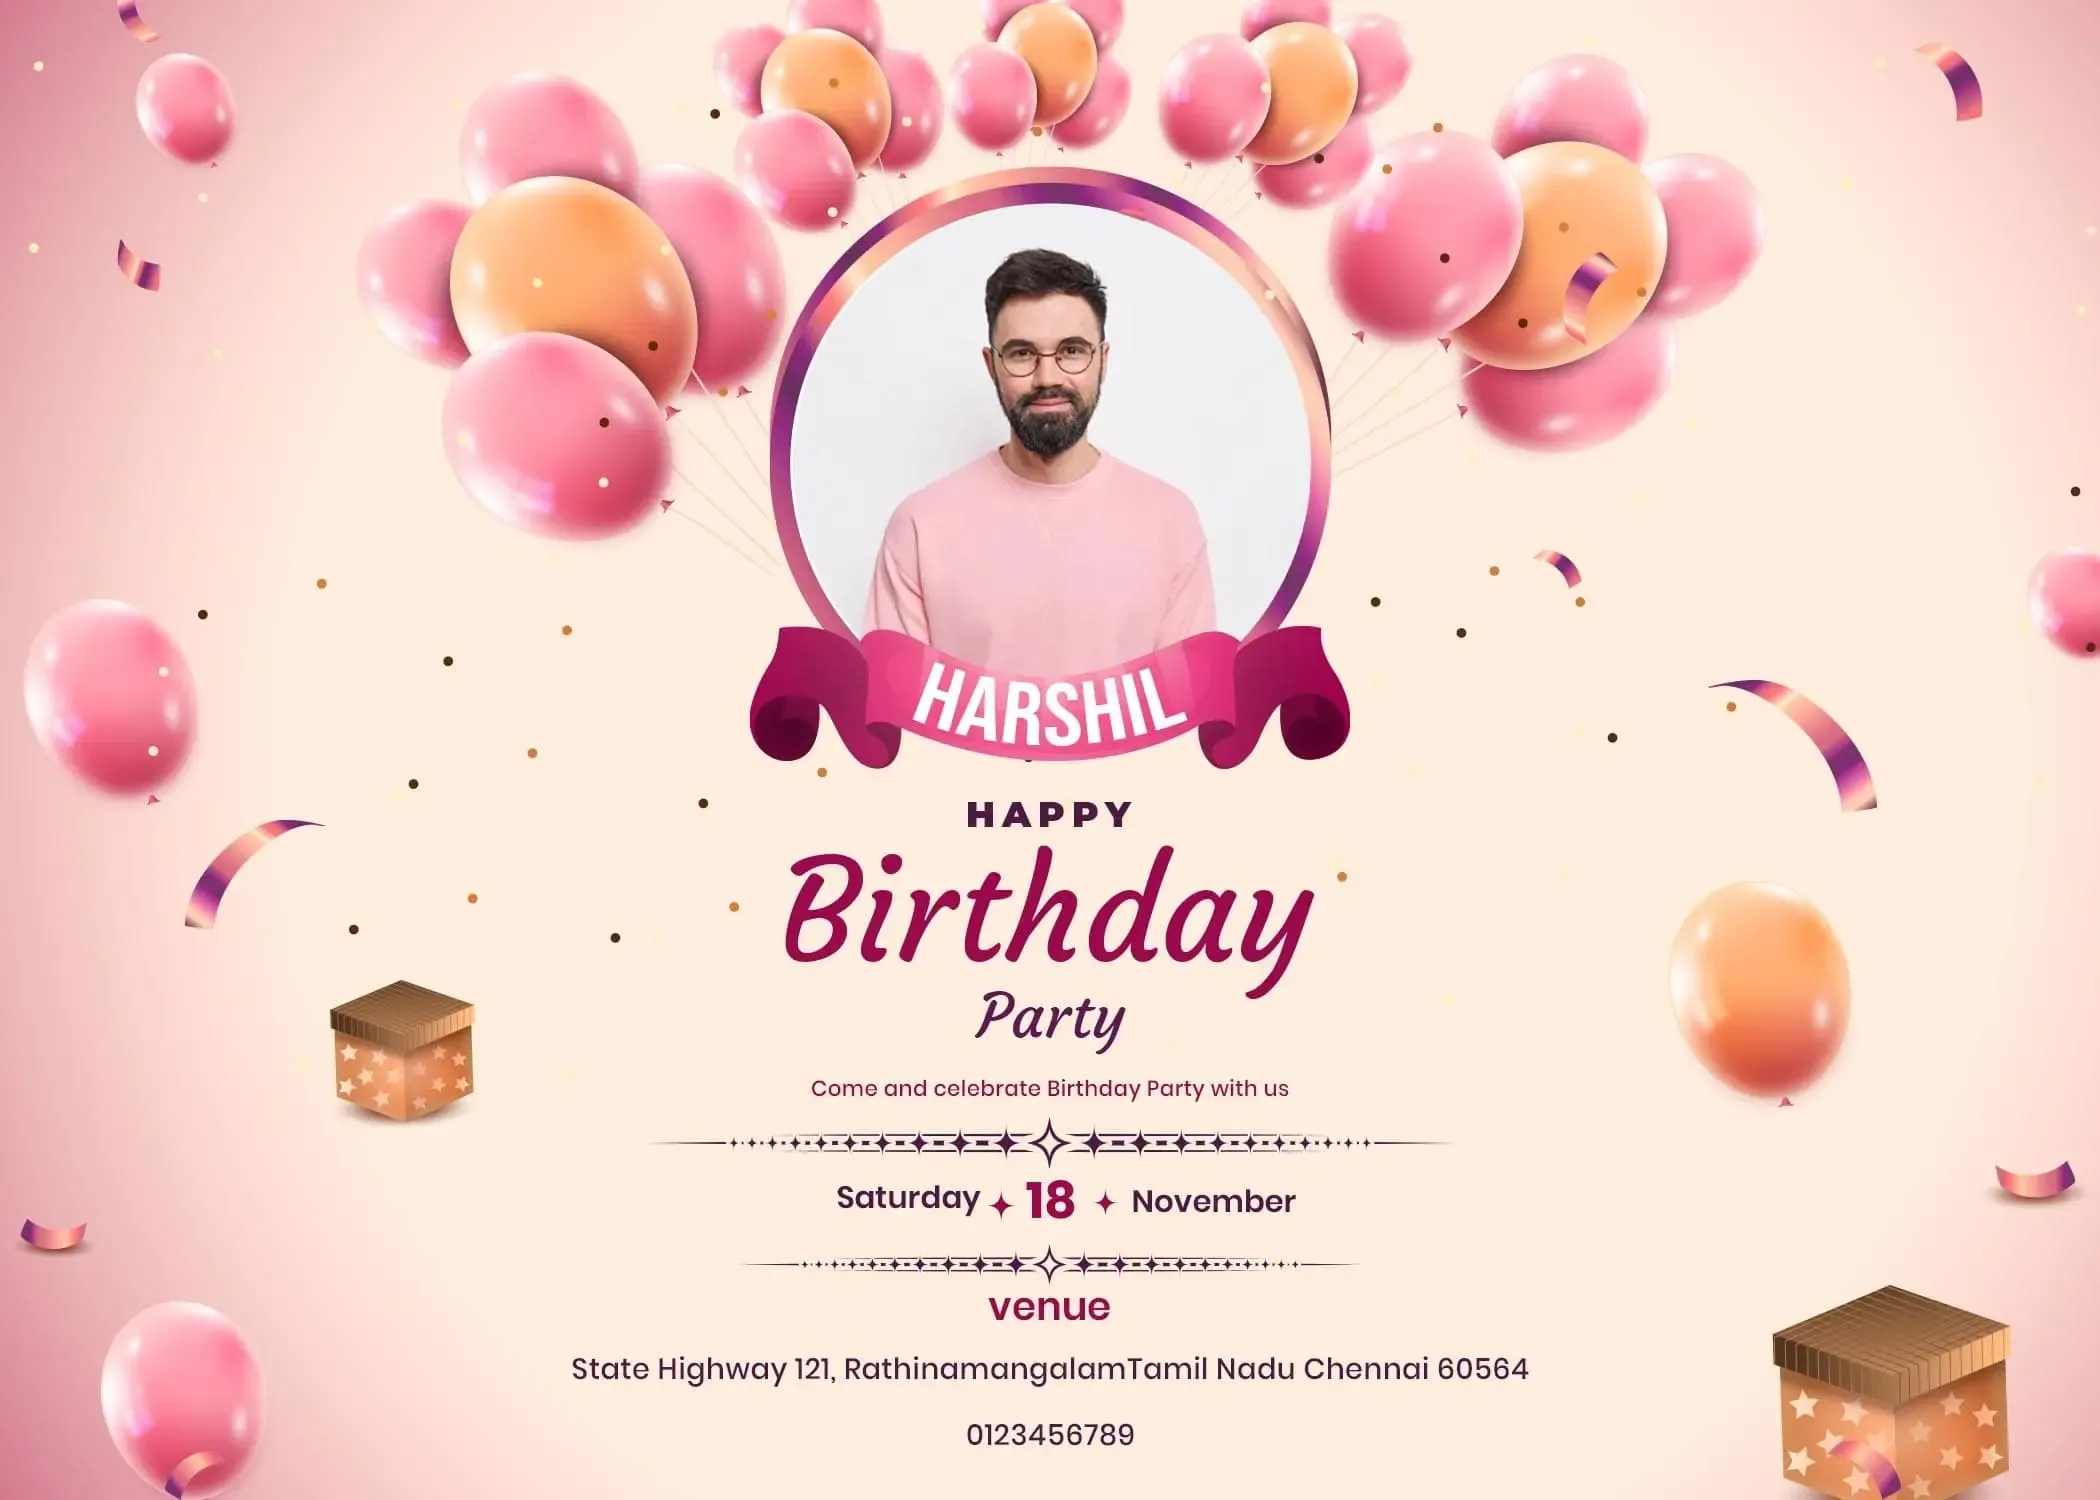 Invitation Message for Birthday: Making Your Celebration Special